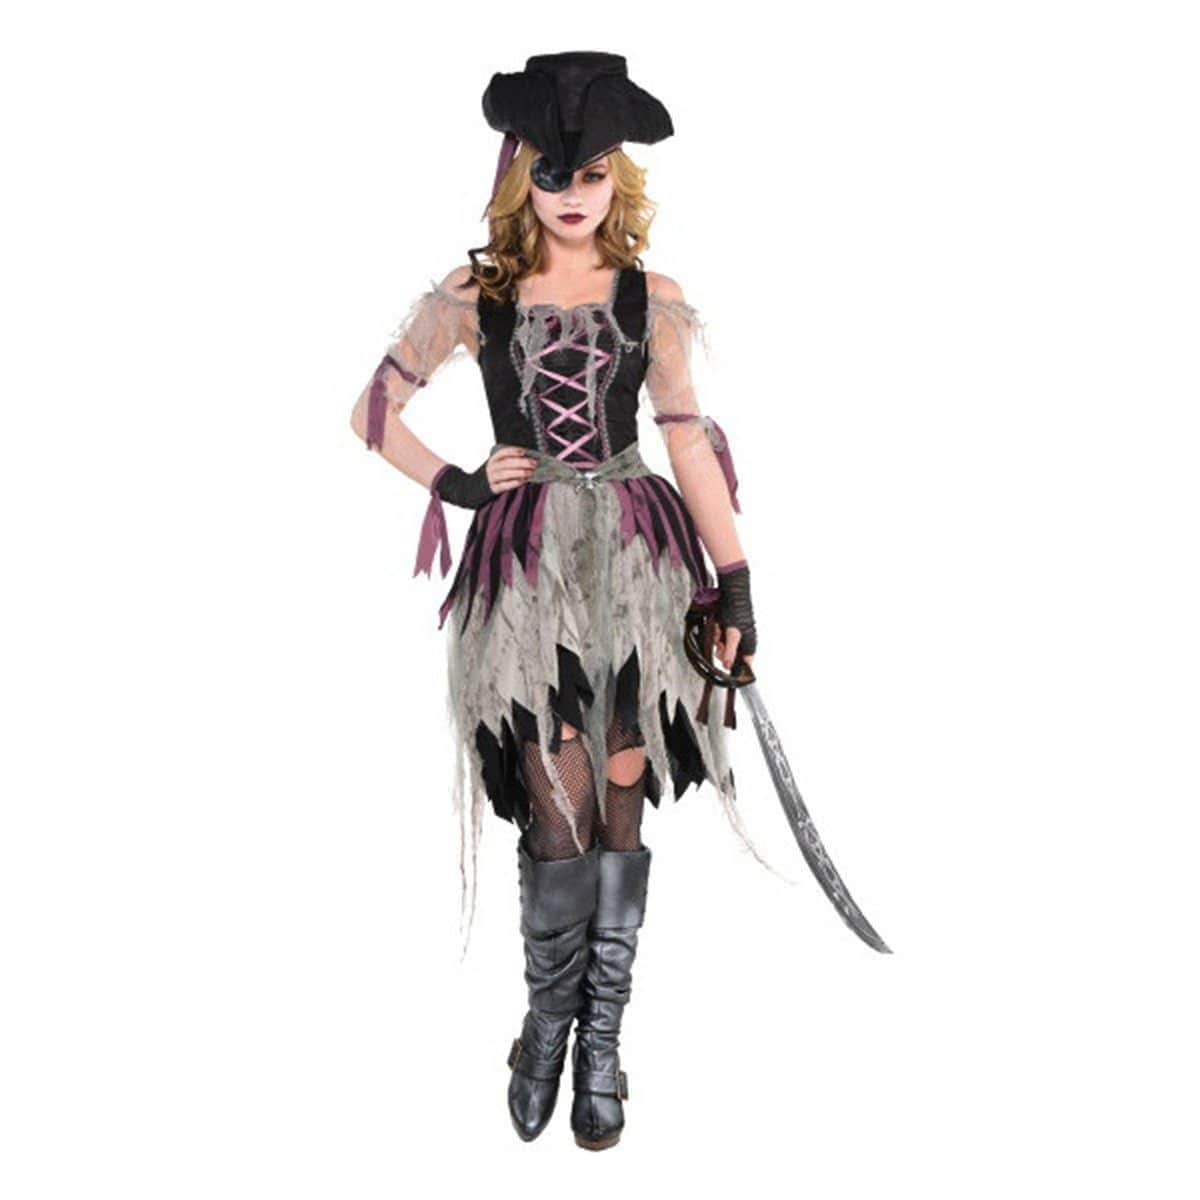 SUIT YOURSELF COSTUME CO. Costumes Haunted Pirate Wench Costume for Adults